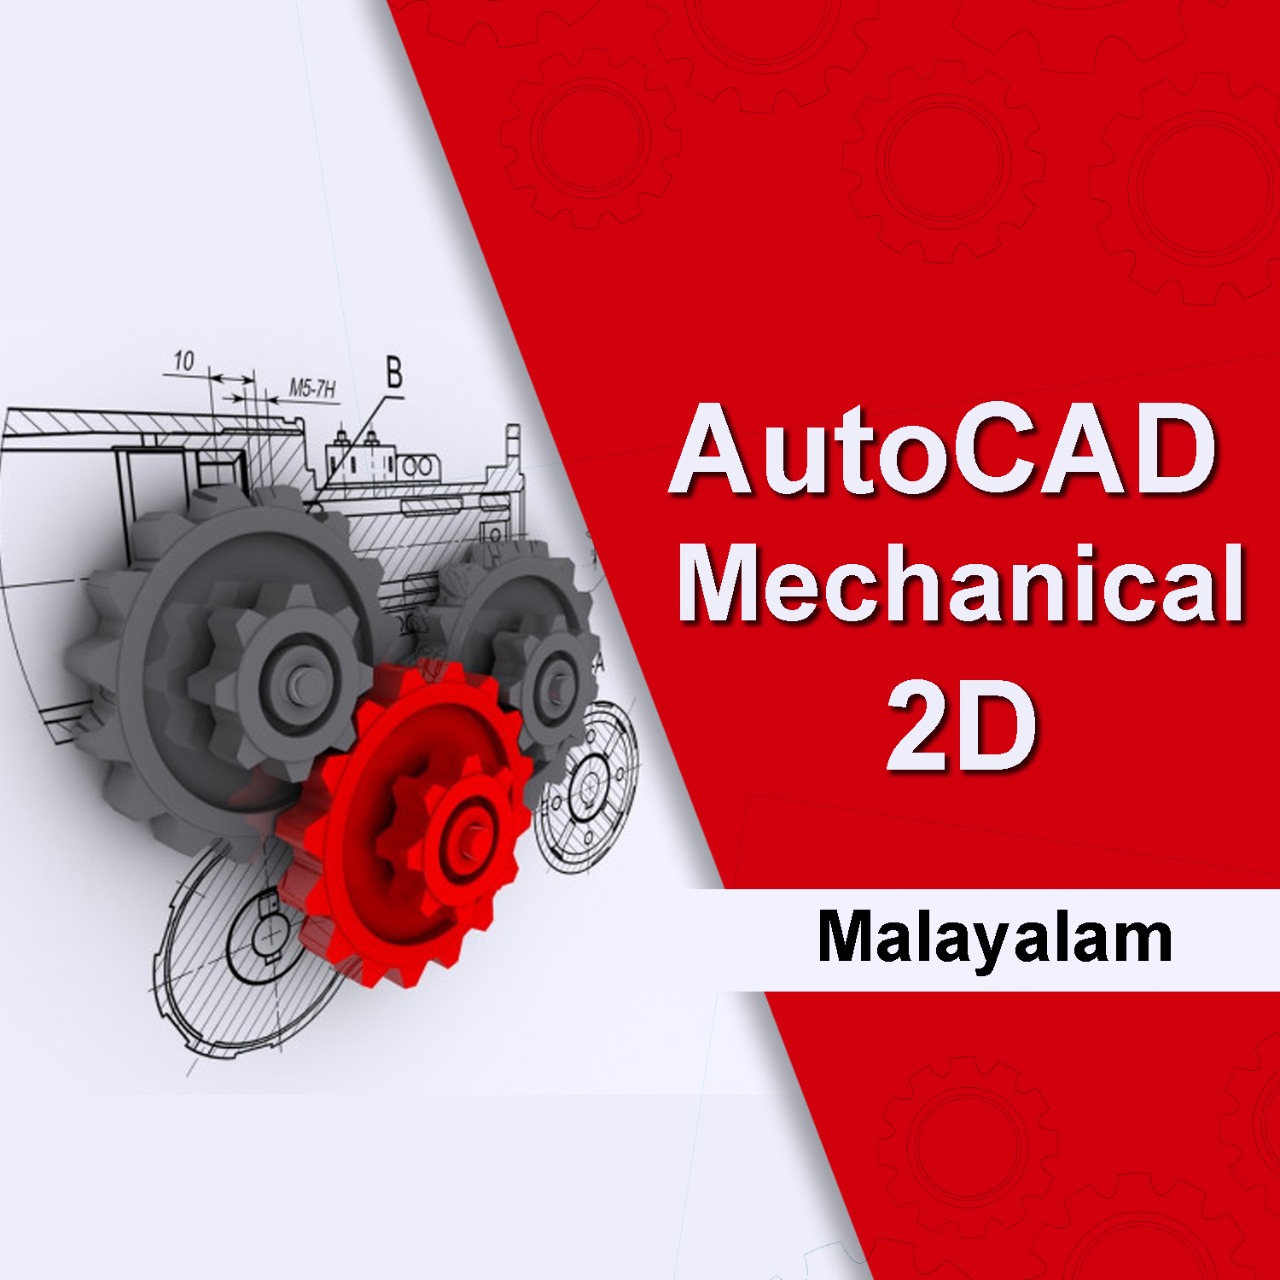 AutoCAD Mechanical 2D in Malayalam